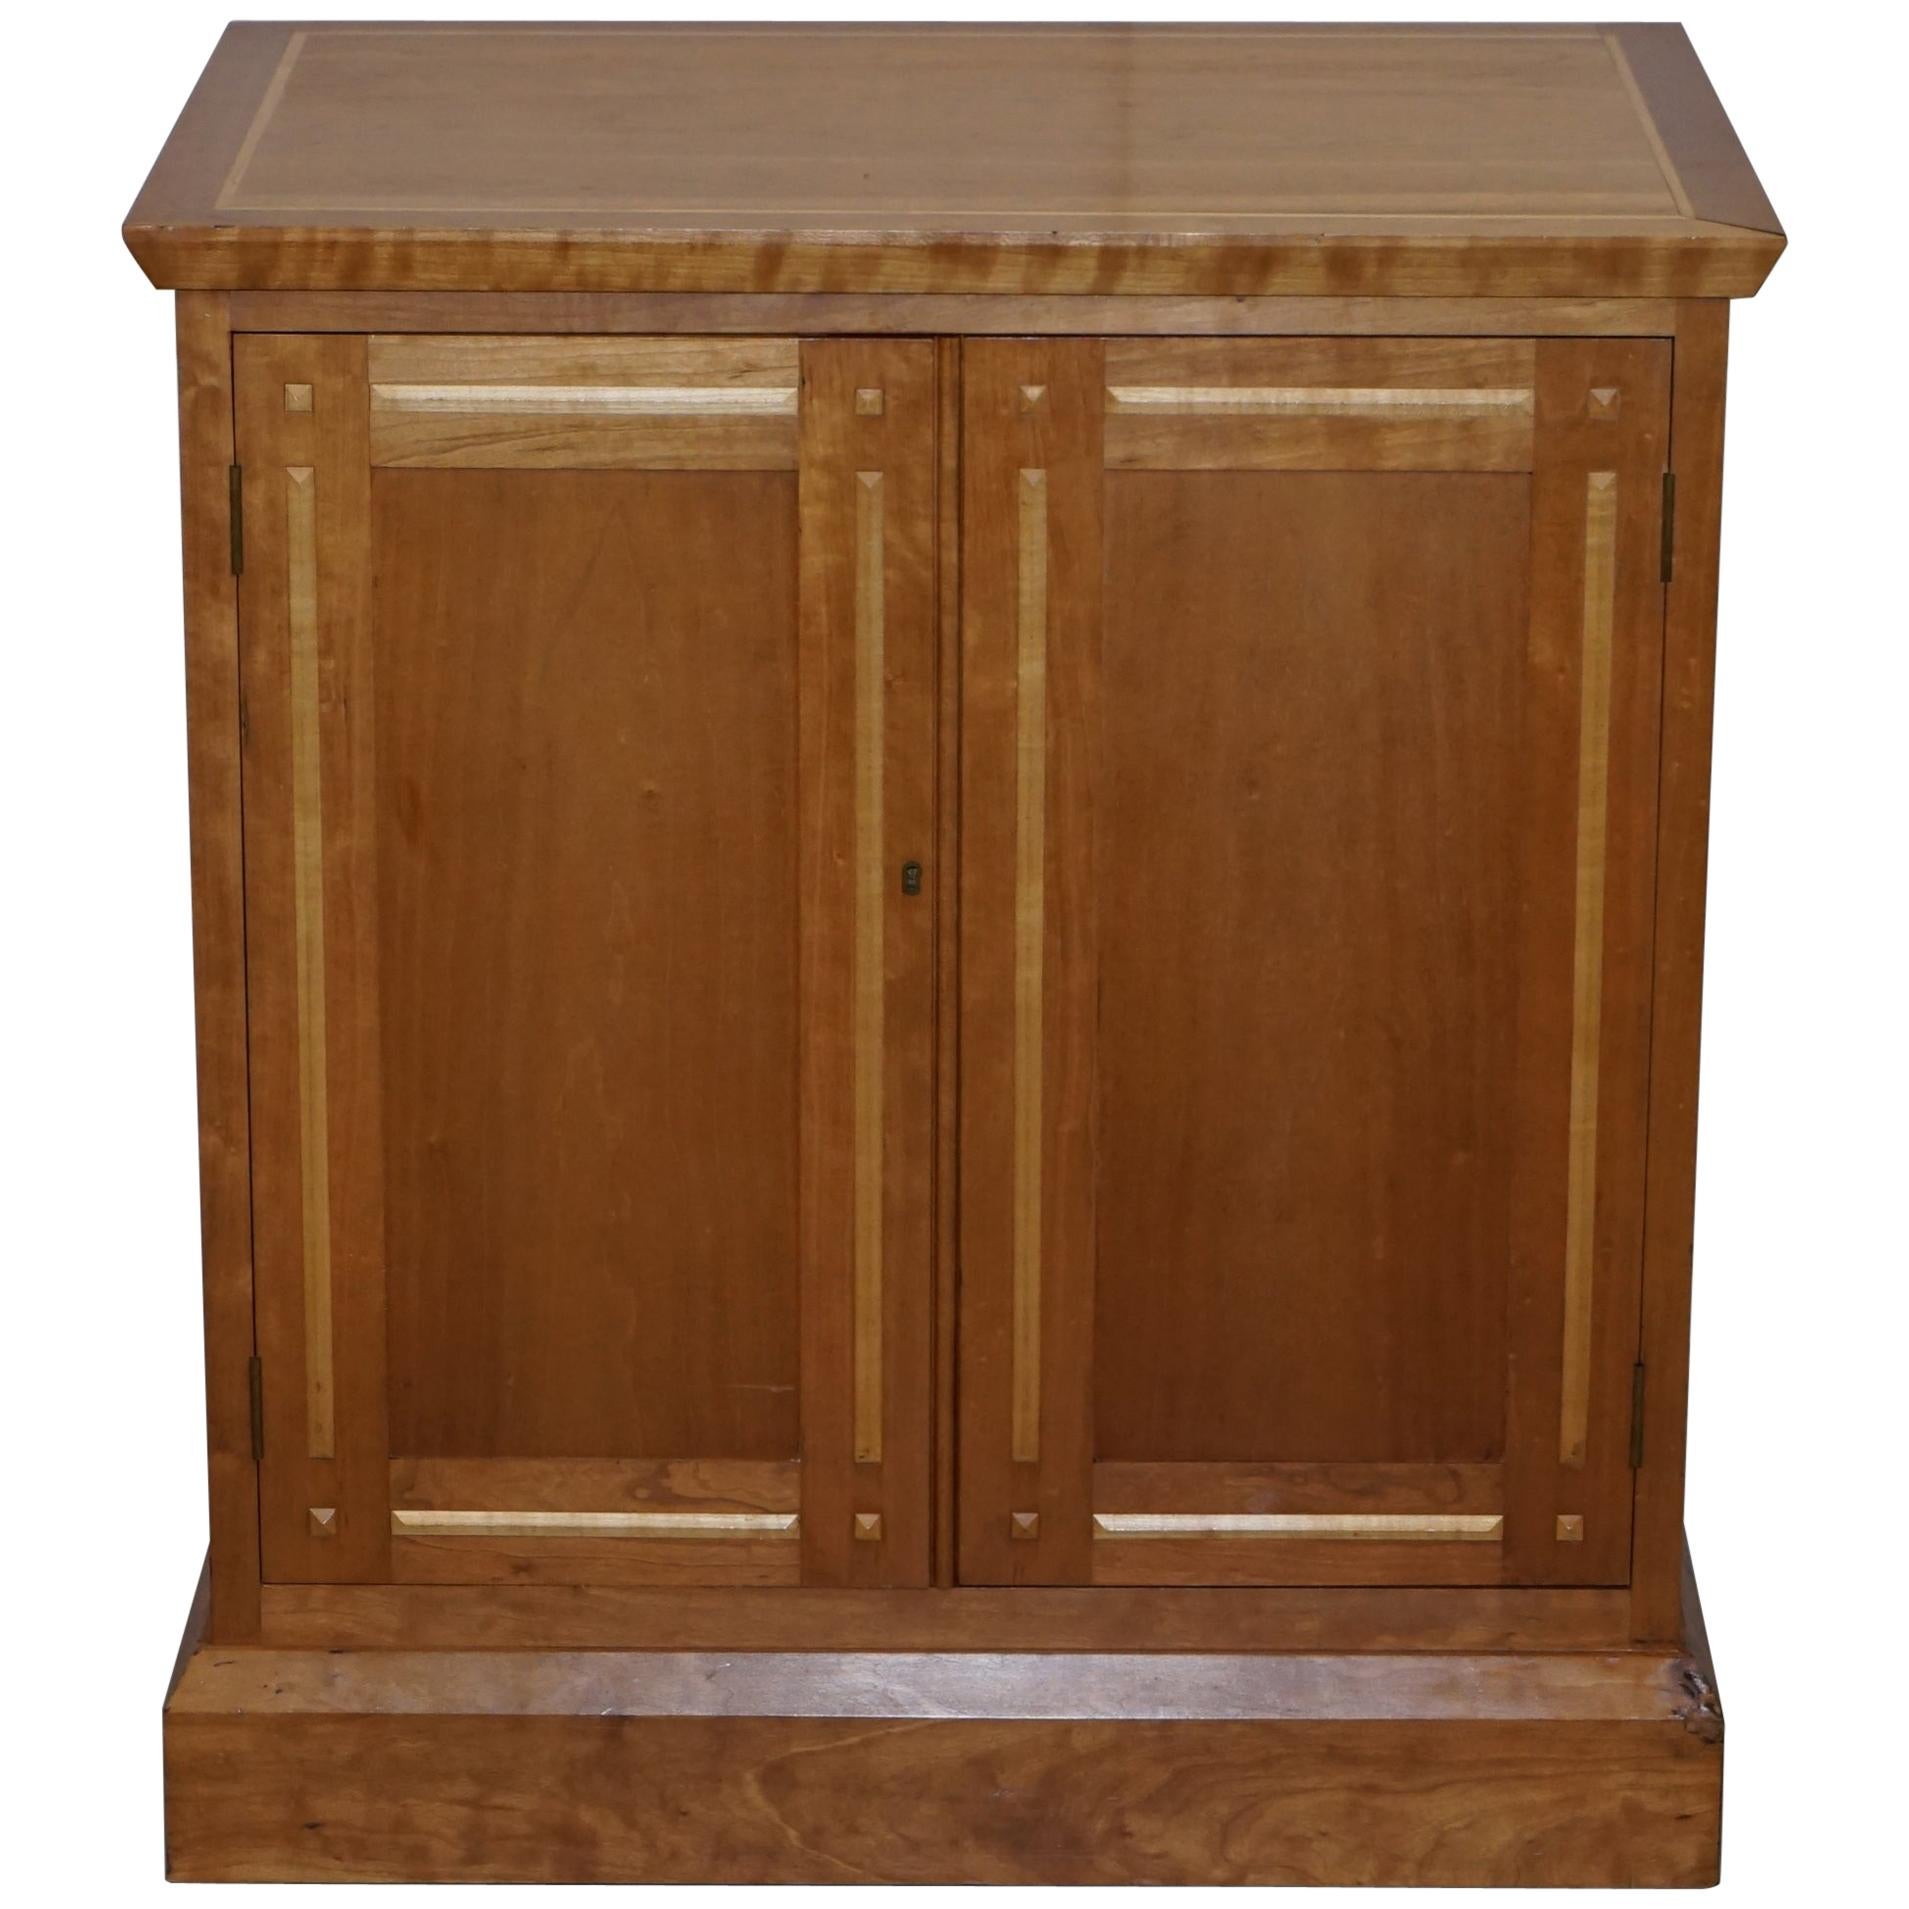 Lovely David Linley Attributed Walnut & Satinwood Cupboard with Sliding Drawers